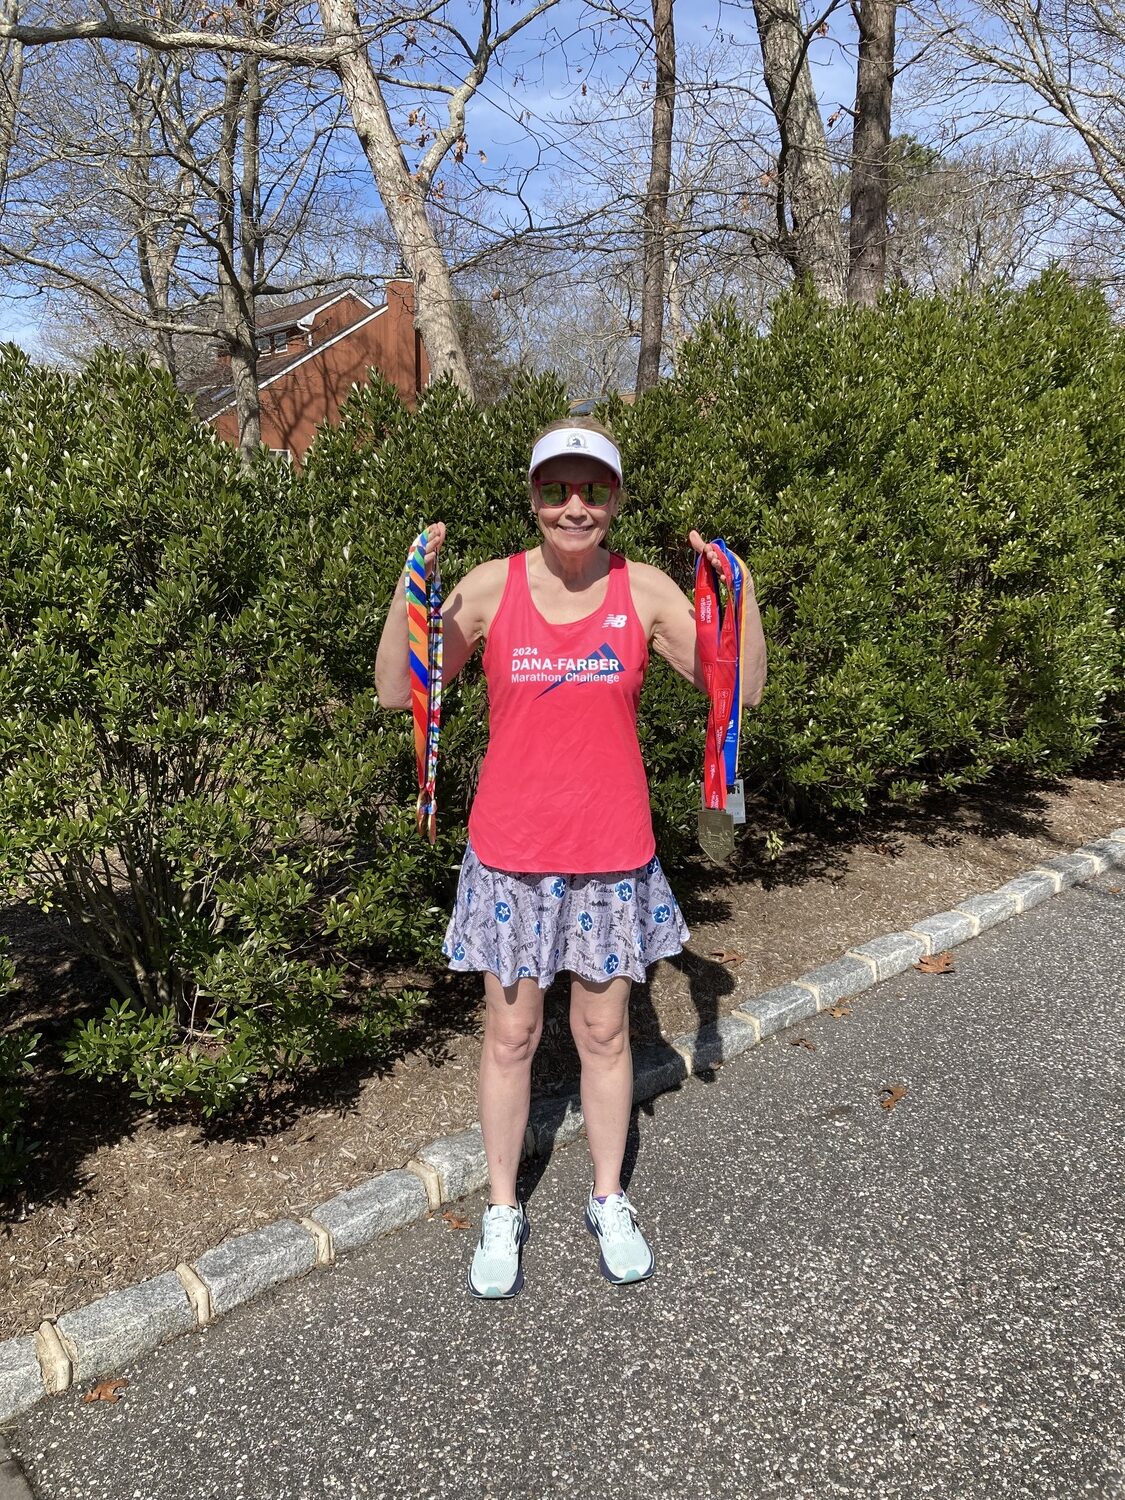 Gail Miranda of Hampton Bays with the five medals she earned from completing five of the six major marathon around the world, which includes New York City, Chicago, London, Berlin and Tokyo.   COURTESY GAIL MIRANDA